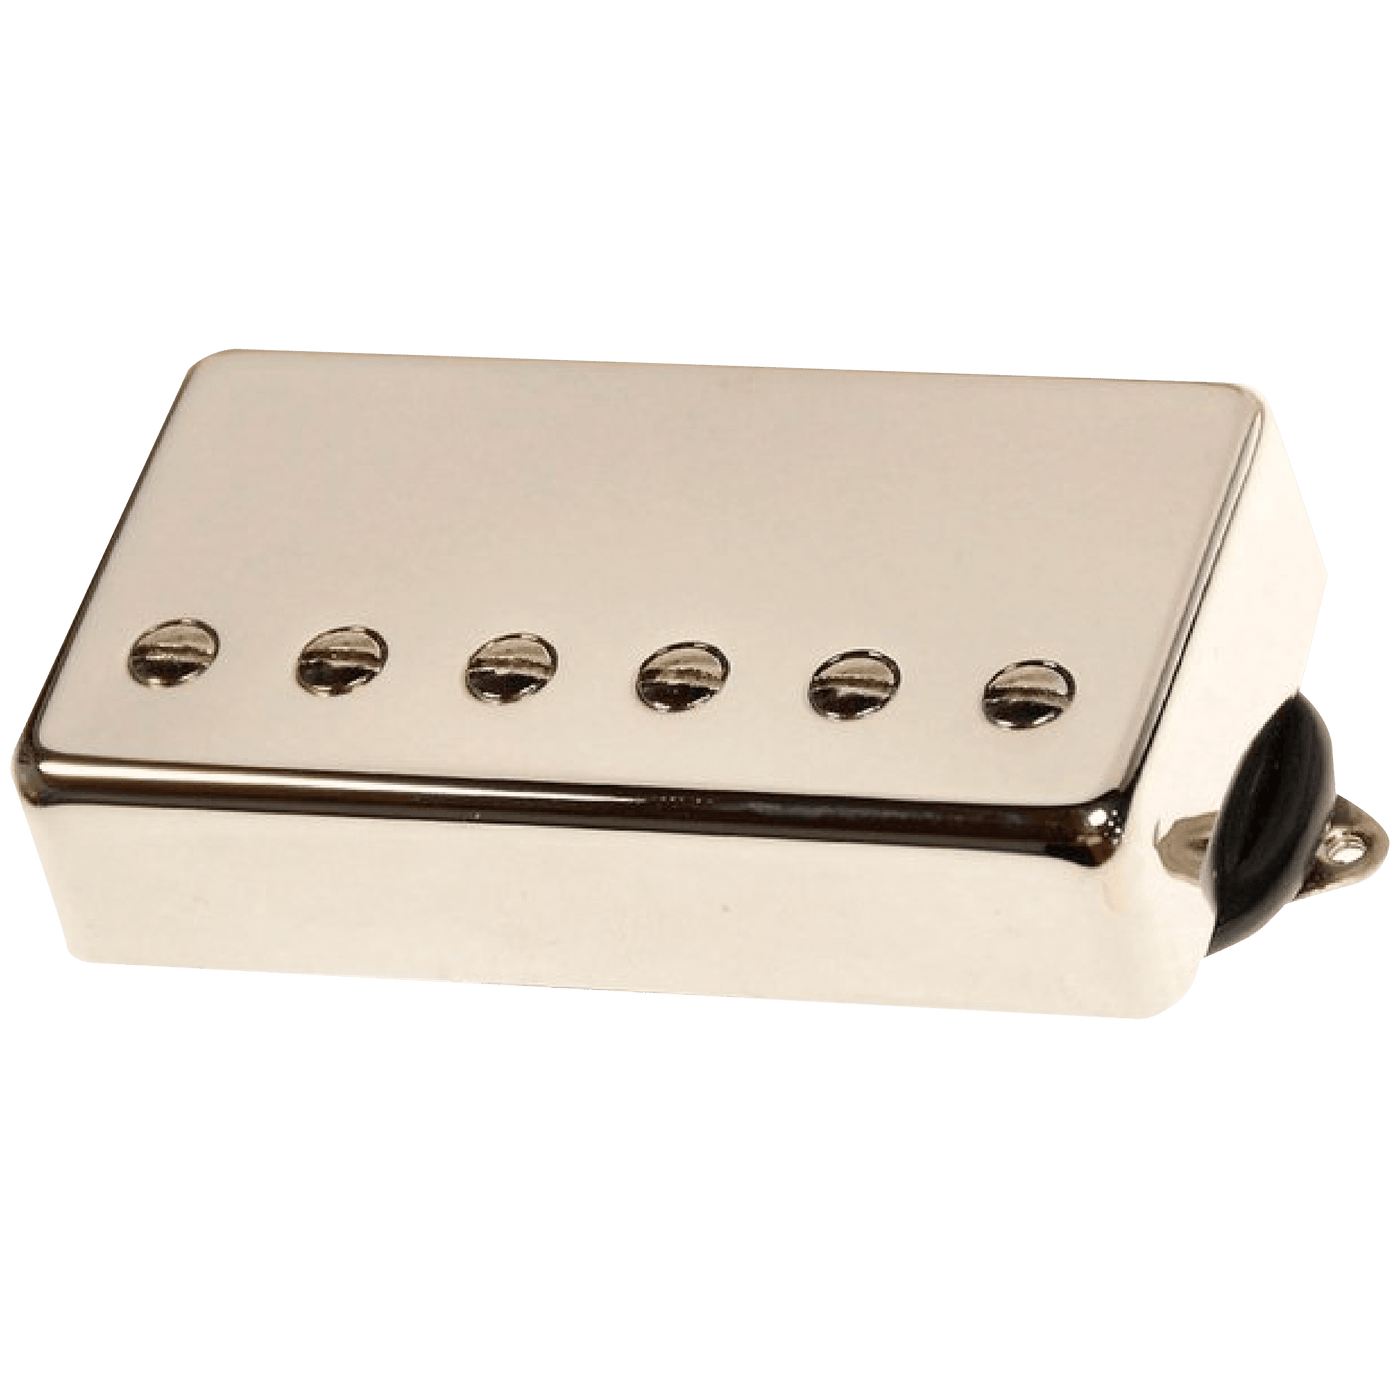 Suhr Aldrich Signature Humbucker Nickel Chrome (Bridge) - $189990 - Gearhub - The result of collaboration between John Suhr and rock guitarist extraordinaire Doug Aldrich, the Aldrich humbuckers are the ultimate high-output pickups for aggressive rock style of playing. The Aldrich bridge humbucker is now our highest output pickup but it oozes tone across its sound spectrum Spacing • 50mm DC Resistance • 17.5K Ω Hook Up Wire • 4-Conductor Magnet • Alnico V Special